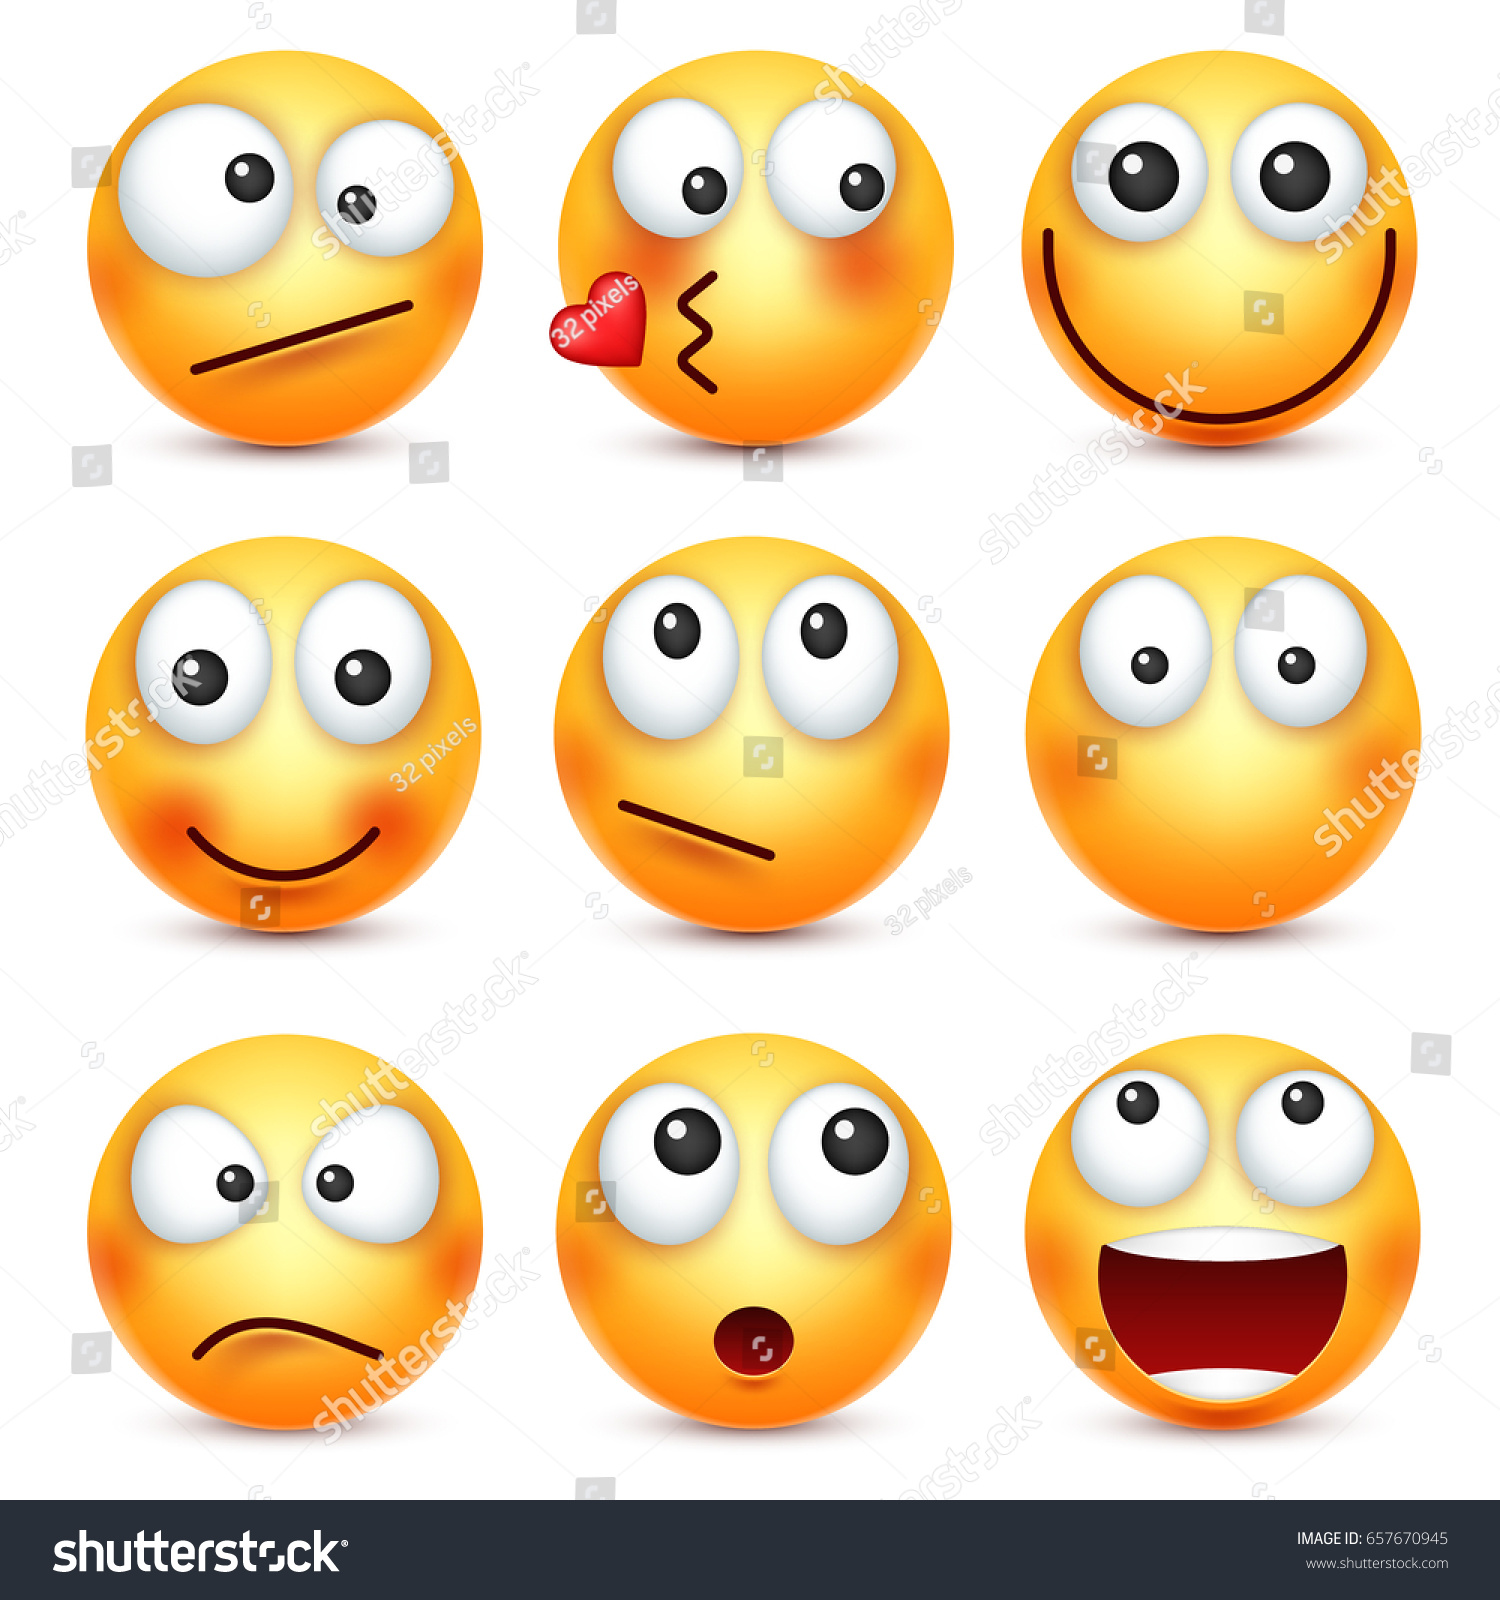 Smileyemoticons Set Yellow Face Emotions Facial Stock Vector (Royalty ...